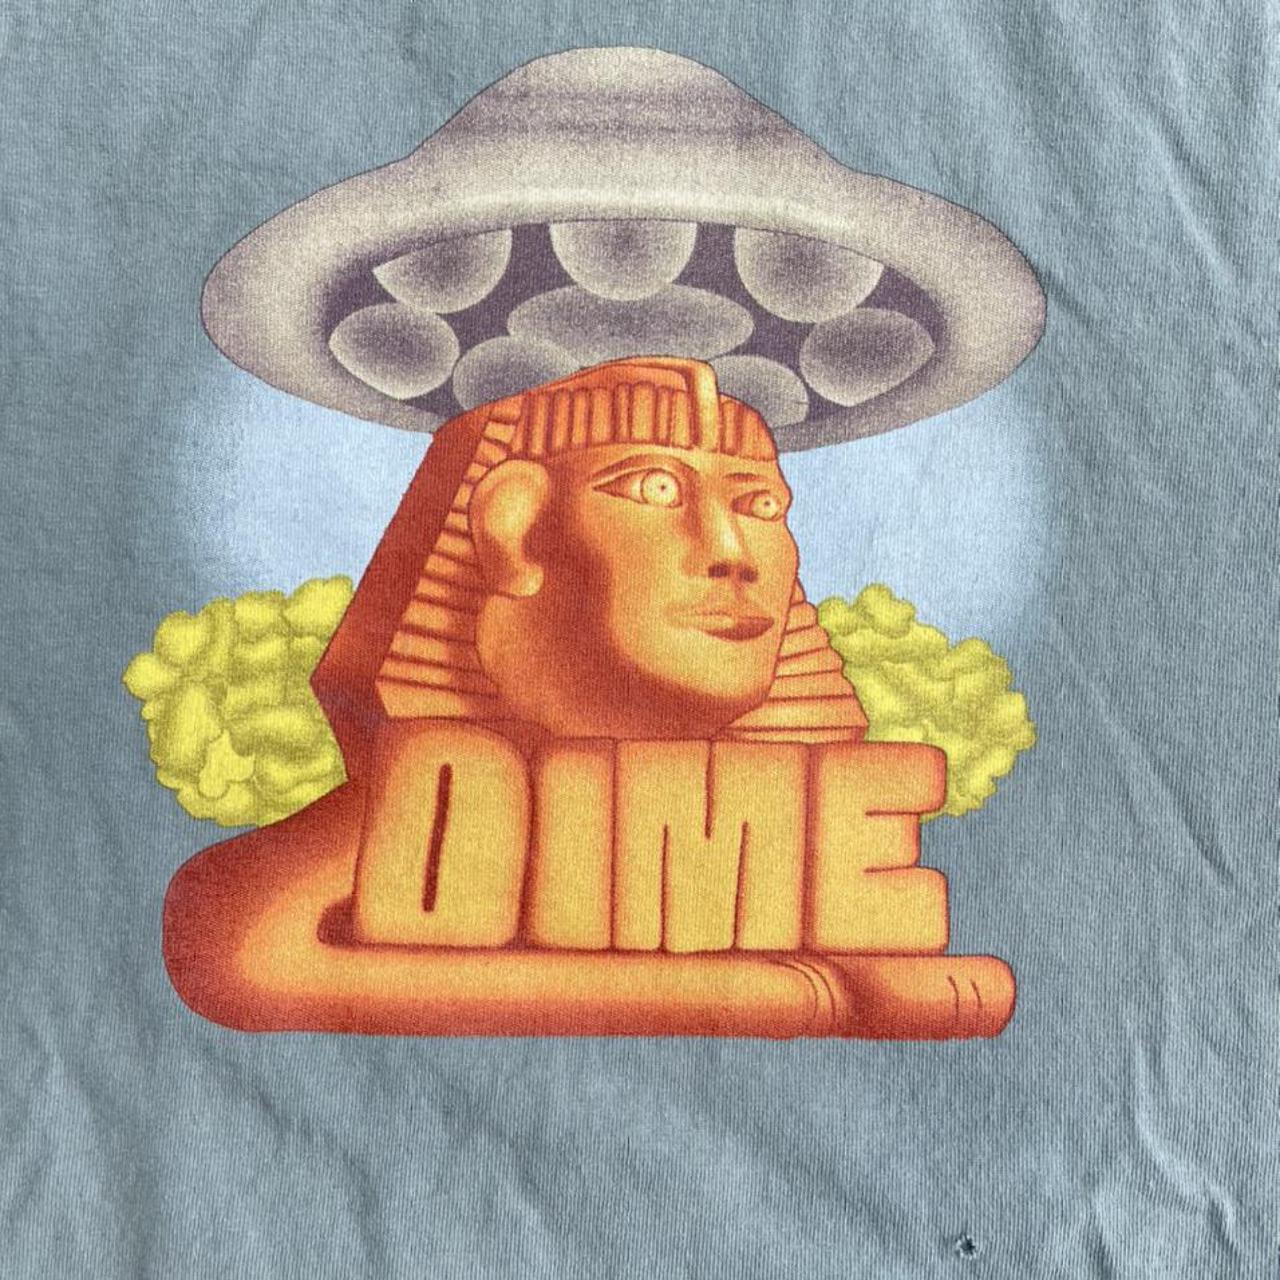 Product Image 3 - Dime Pharaoh Tee in Sage

Size